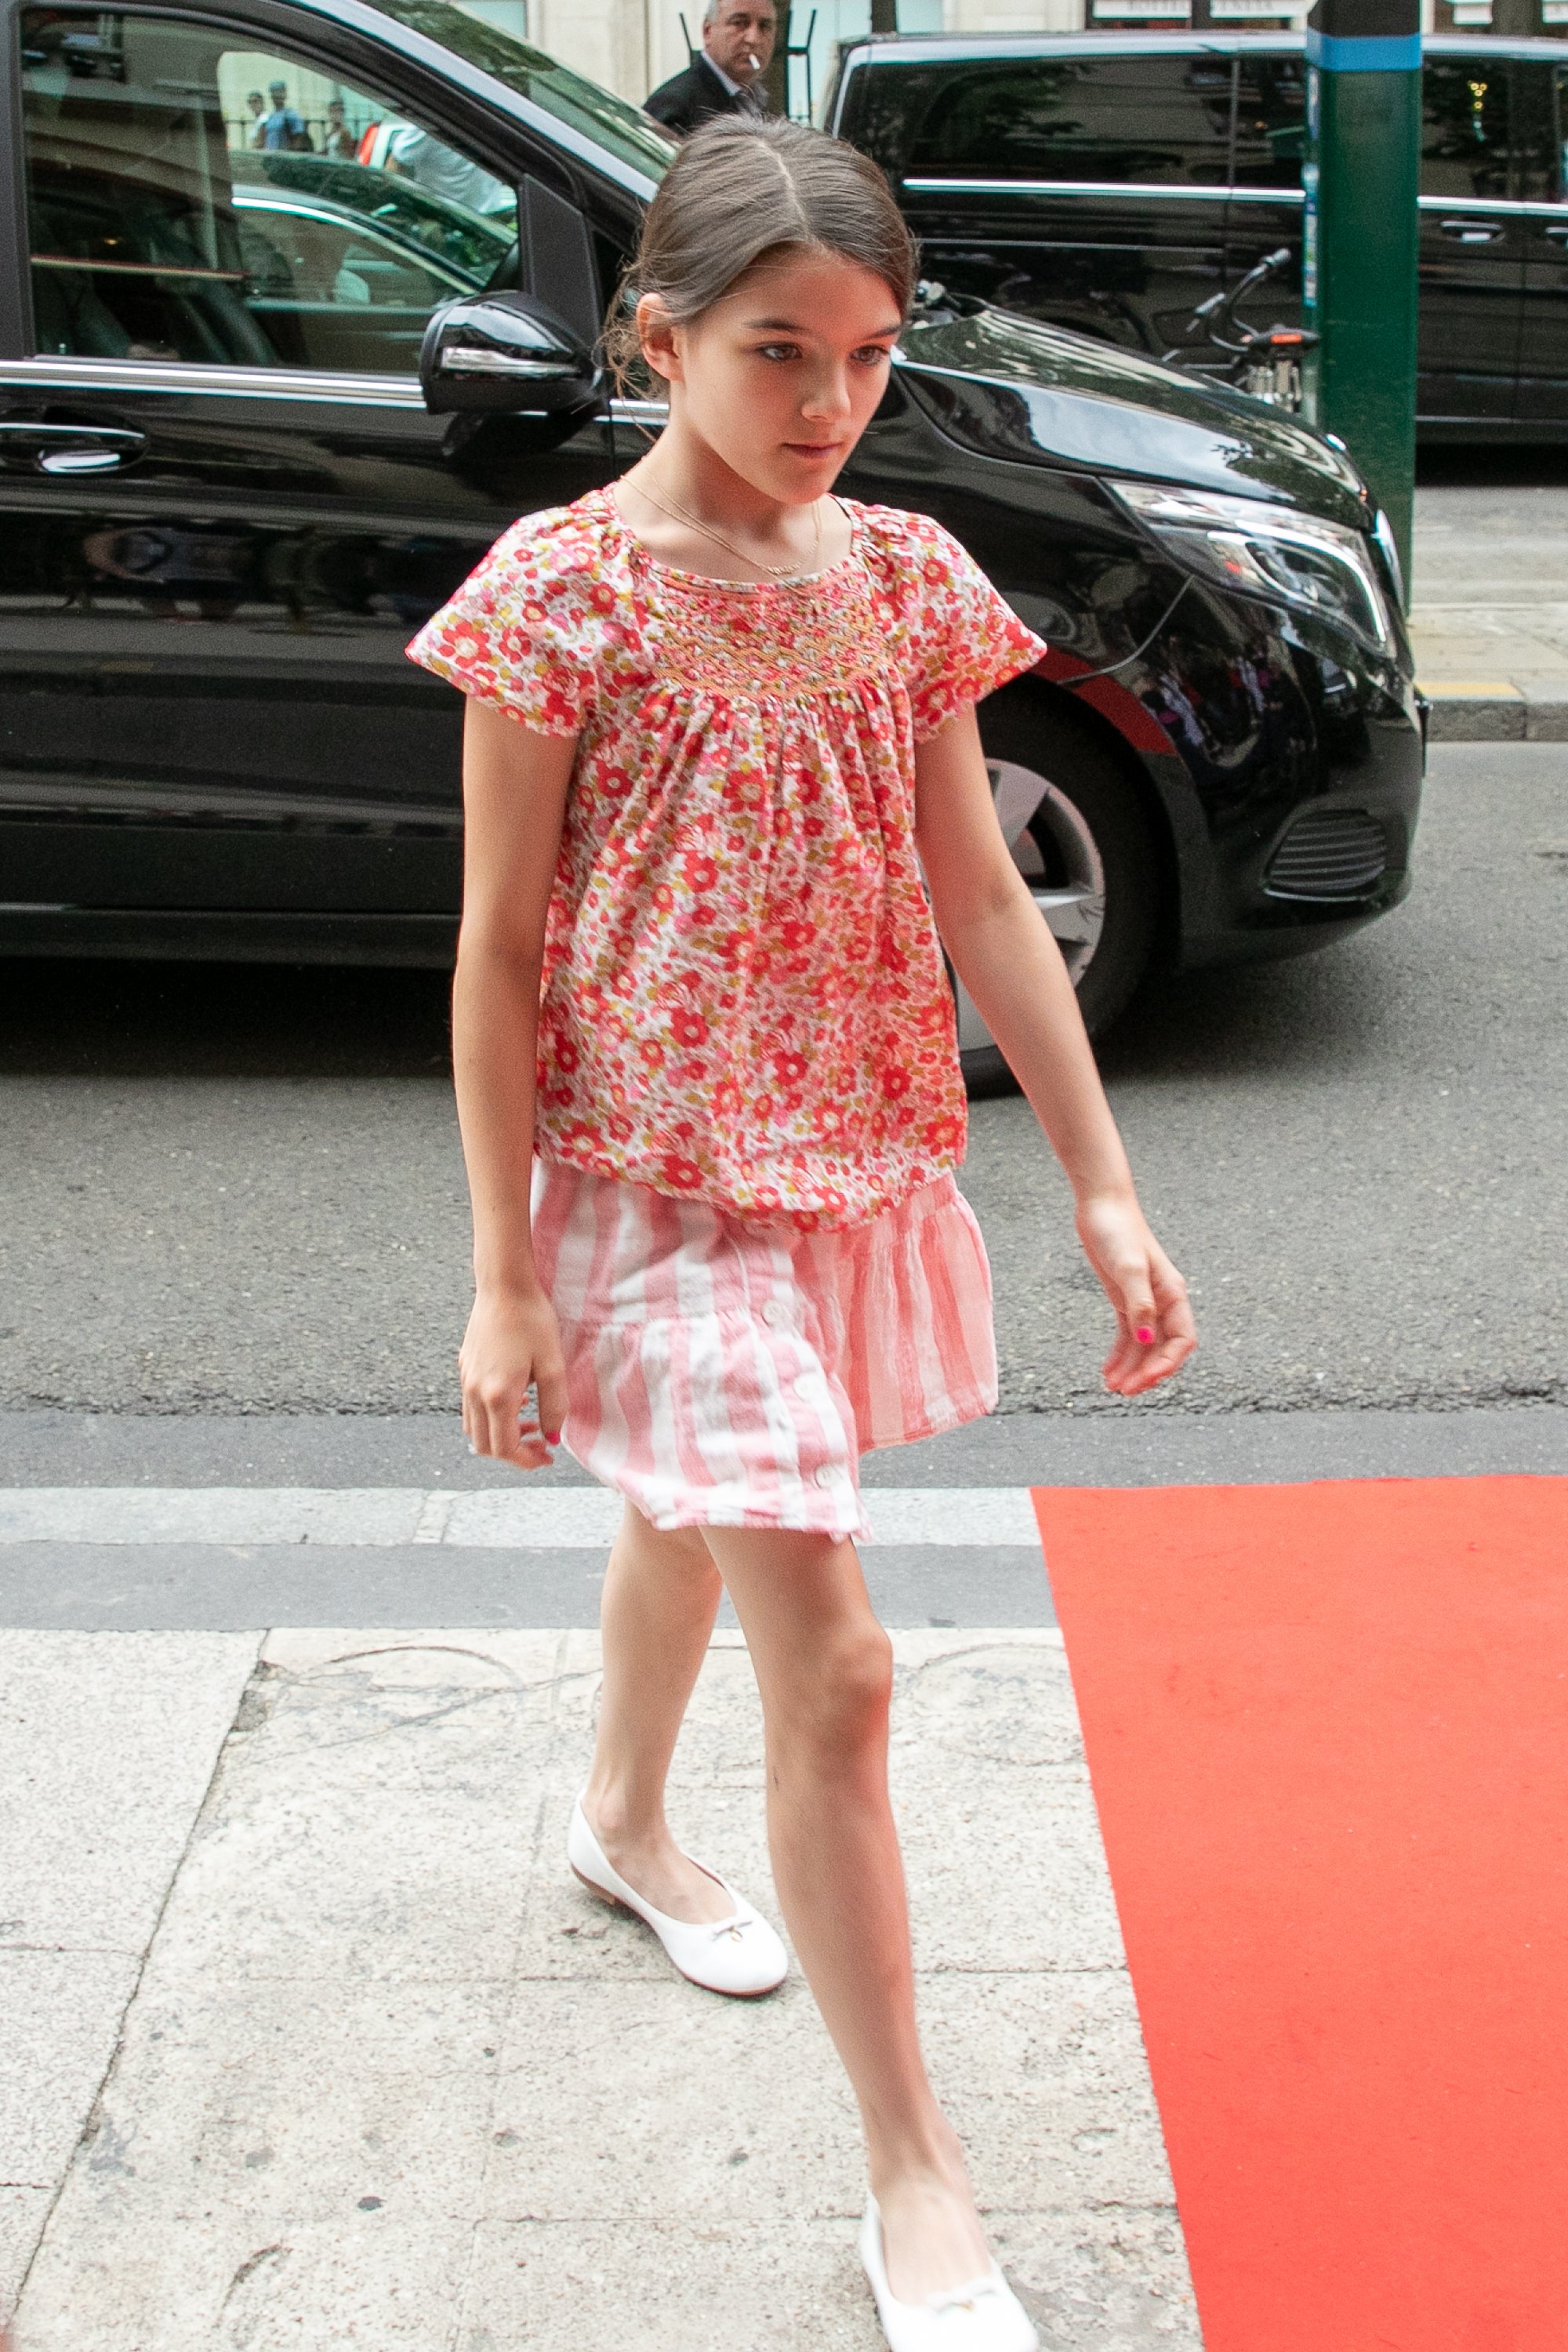  Suri Cruise is seen on July 1, 2018 in Paris, France. | Source: Getty Images